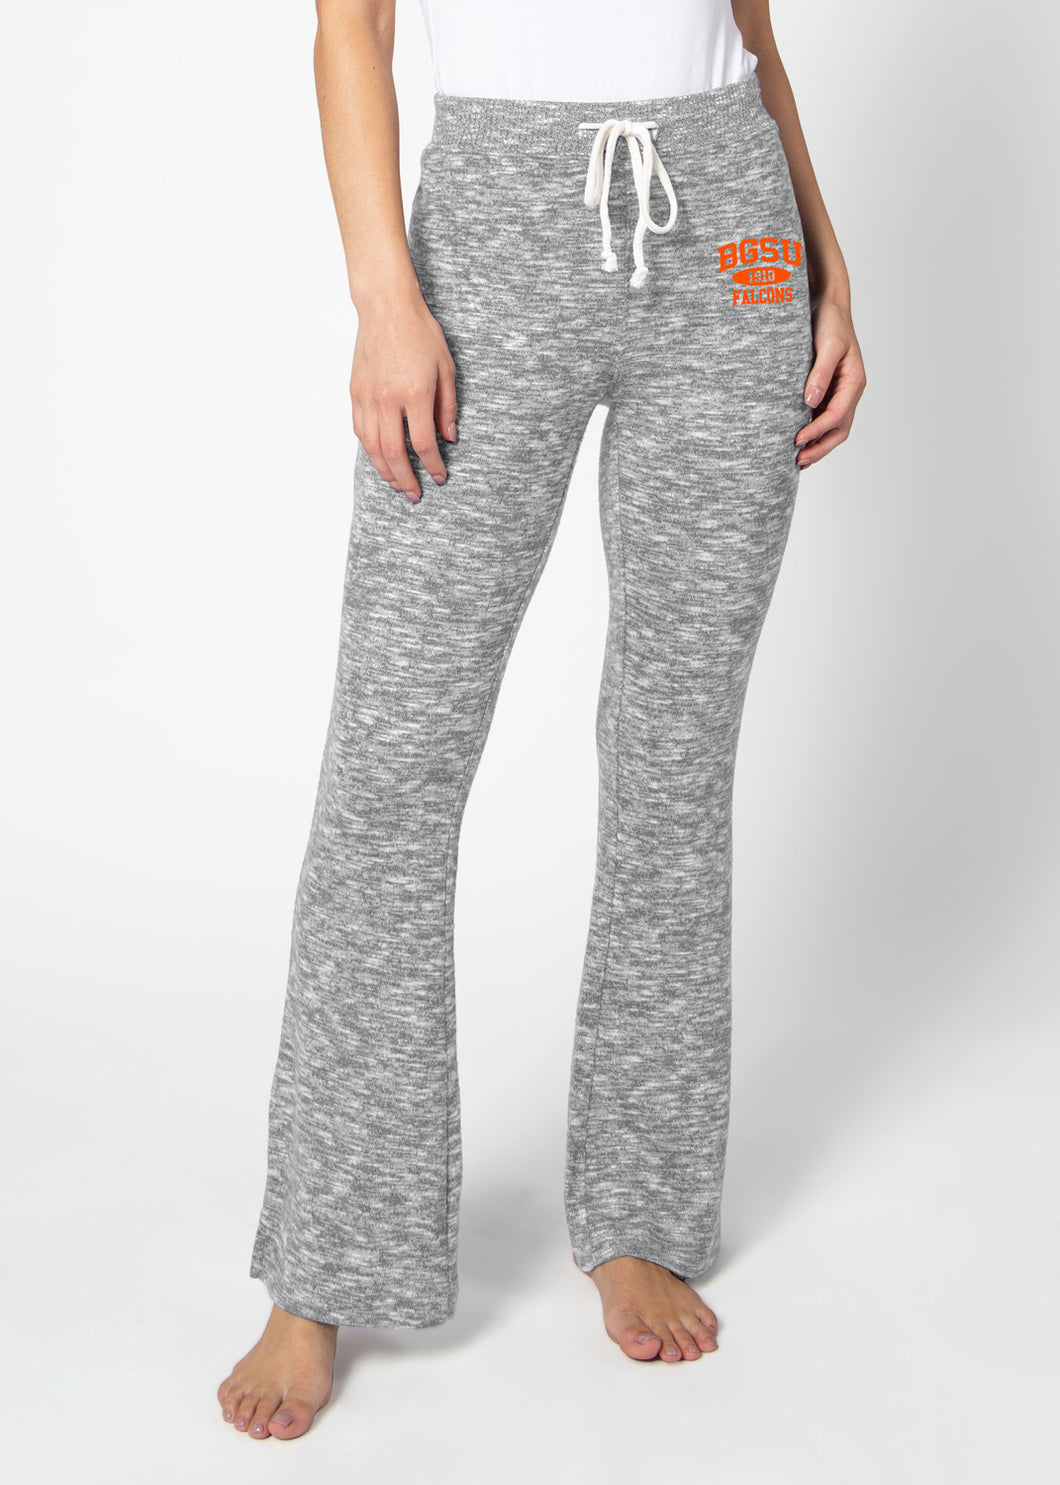 Chicka-D Ladies Comfy Flare Pant